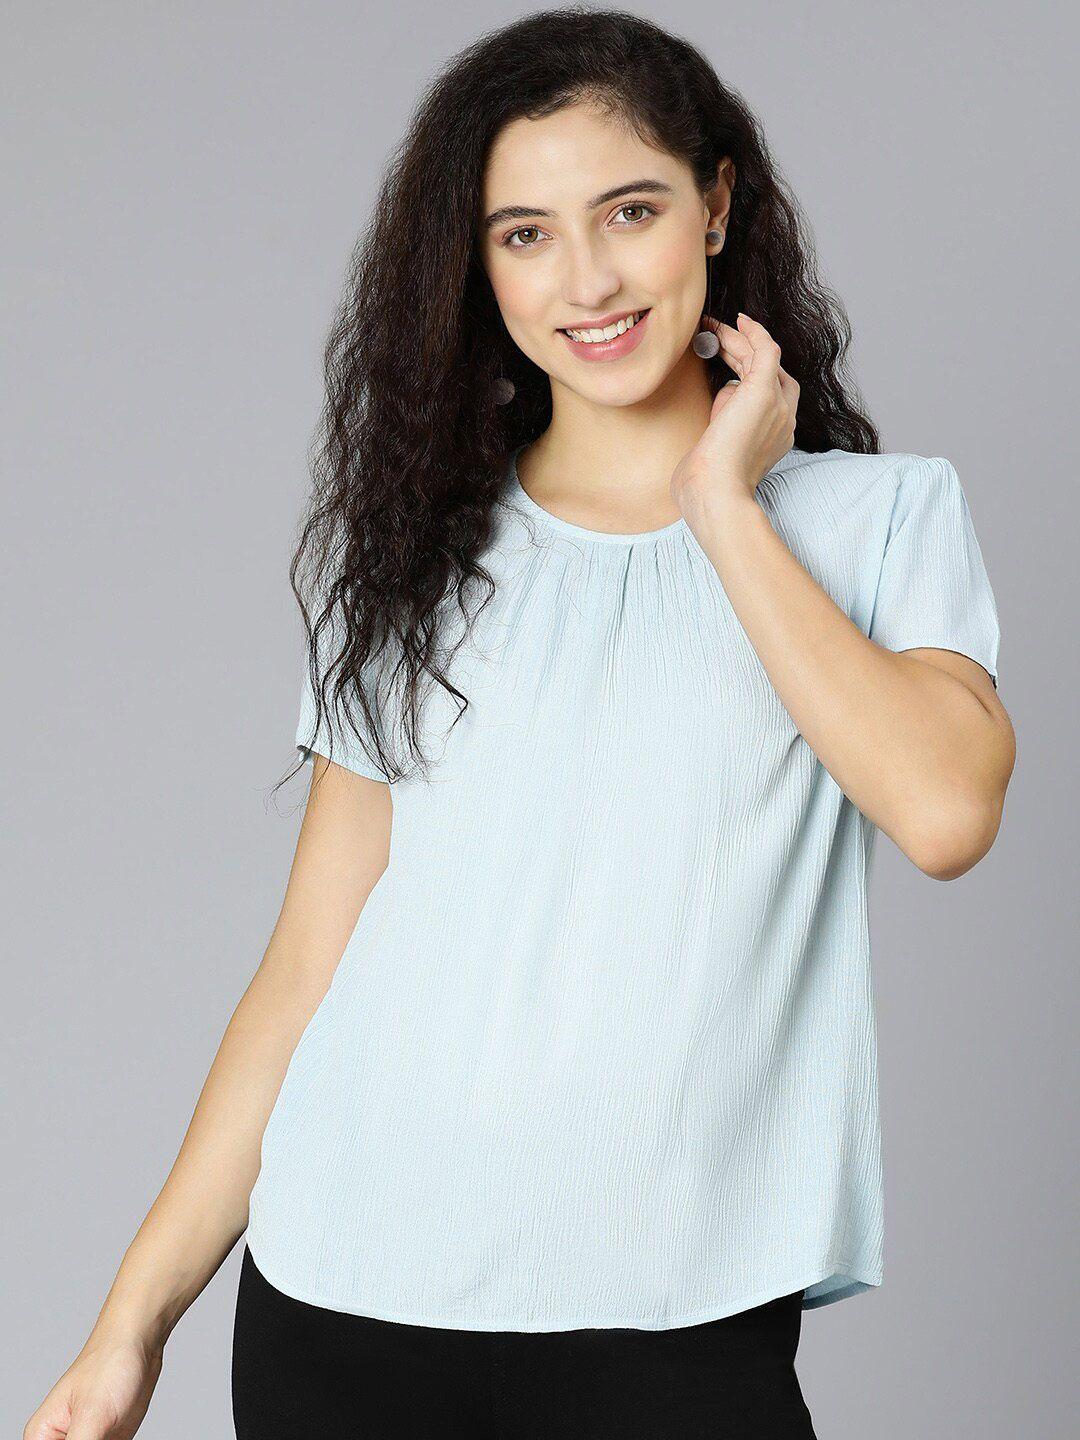 oxolloxo-short-sleeved-crepe-top